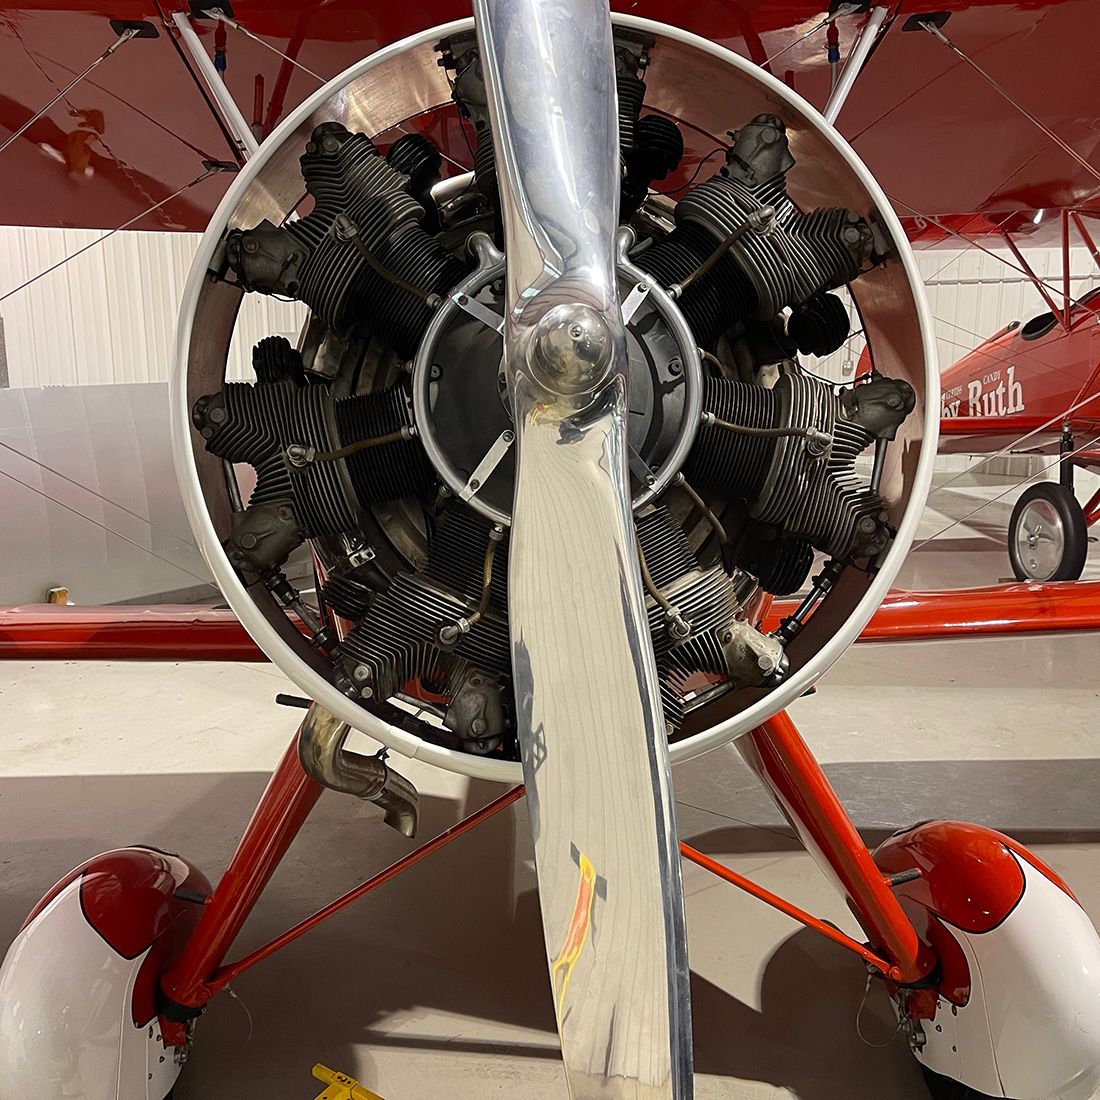 close up of texaco 17 plane from the front. wheel pants and prop are prominent